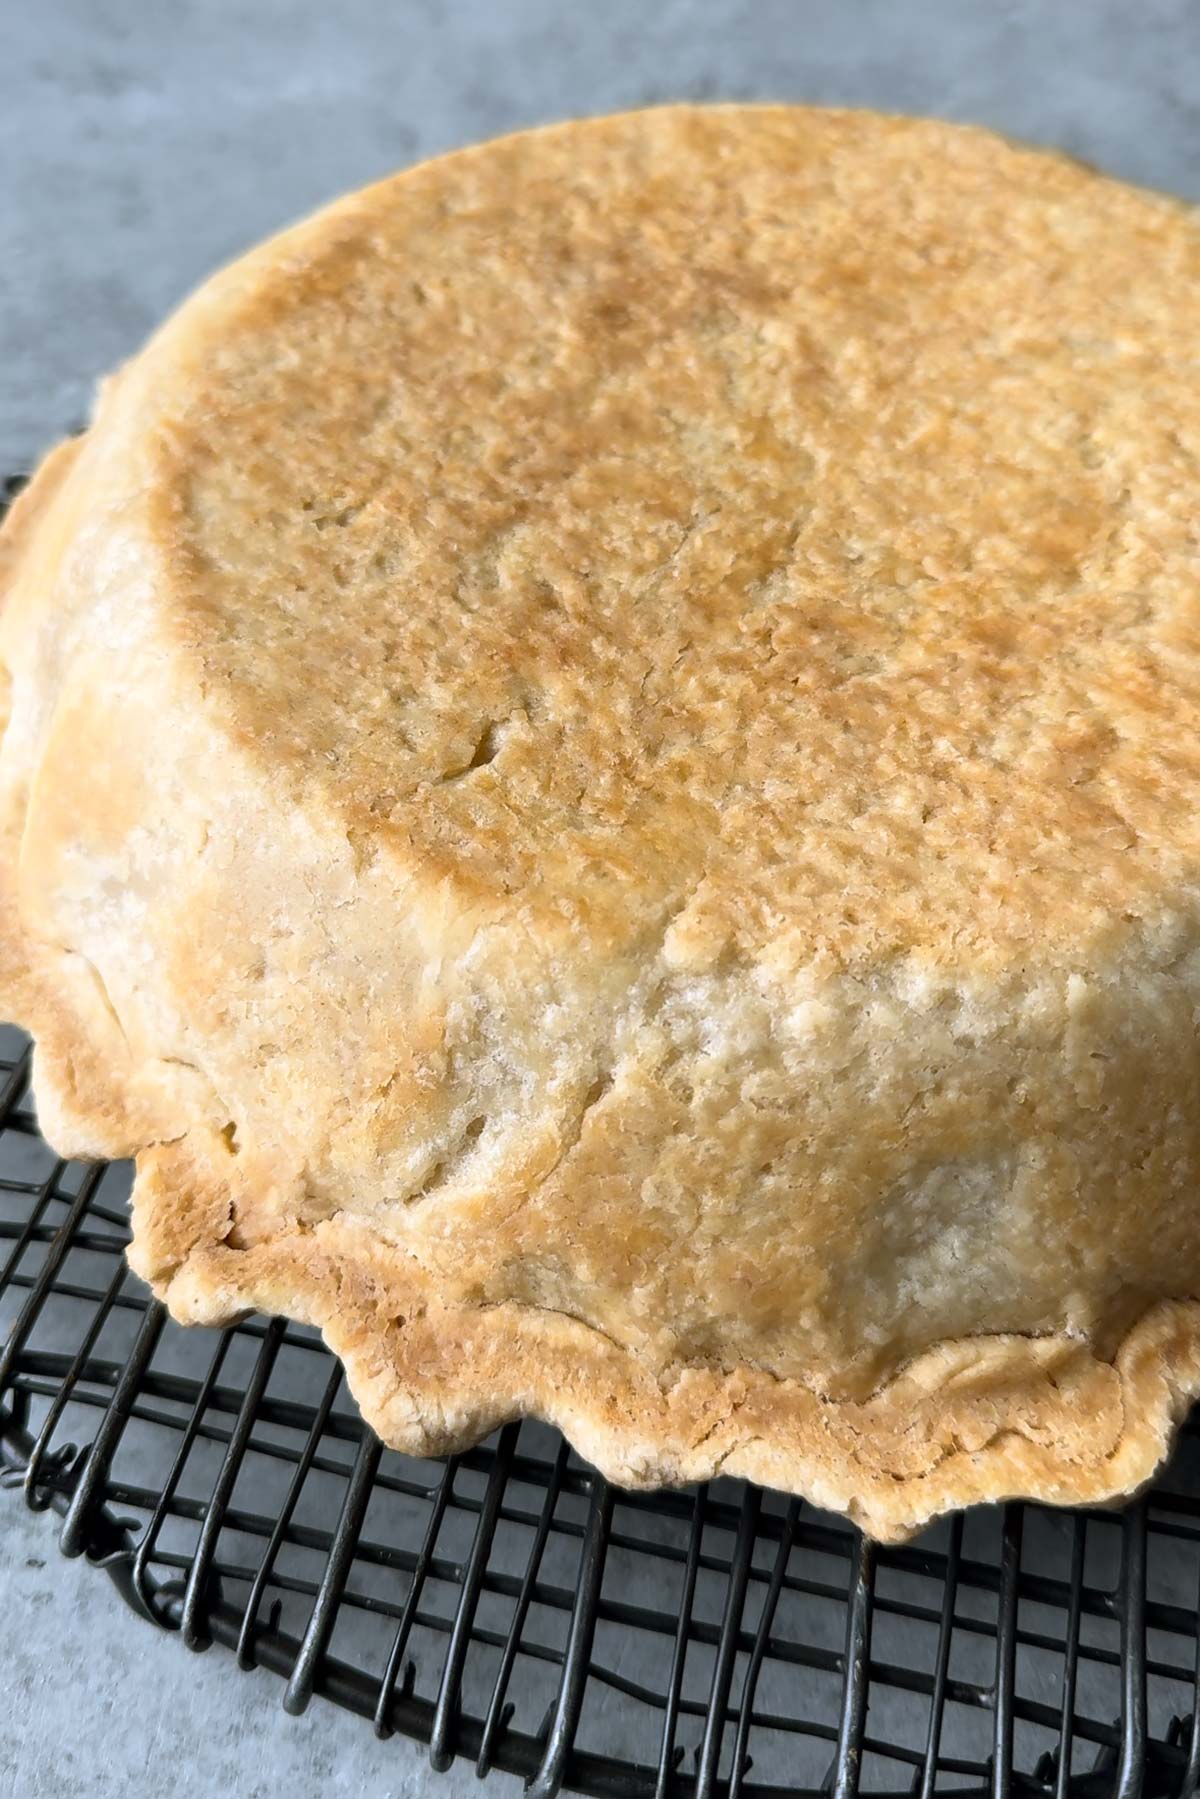 showing the bottom of pie crust that is evenly cooked, crispy, and well colored. 